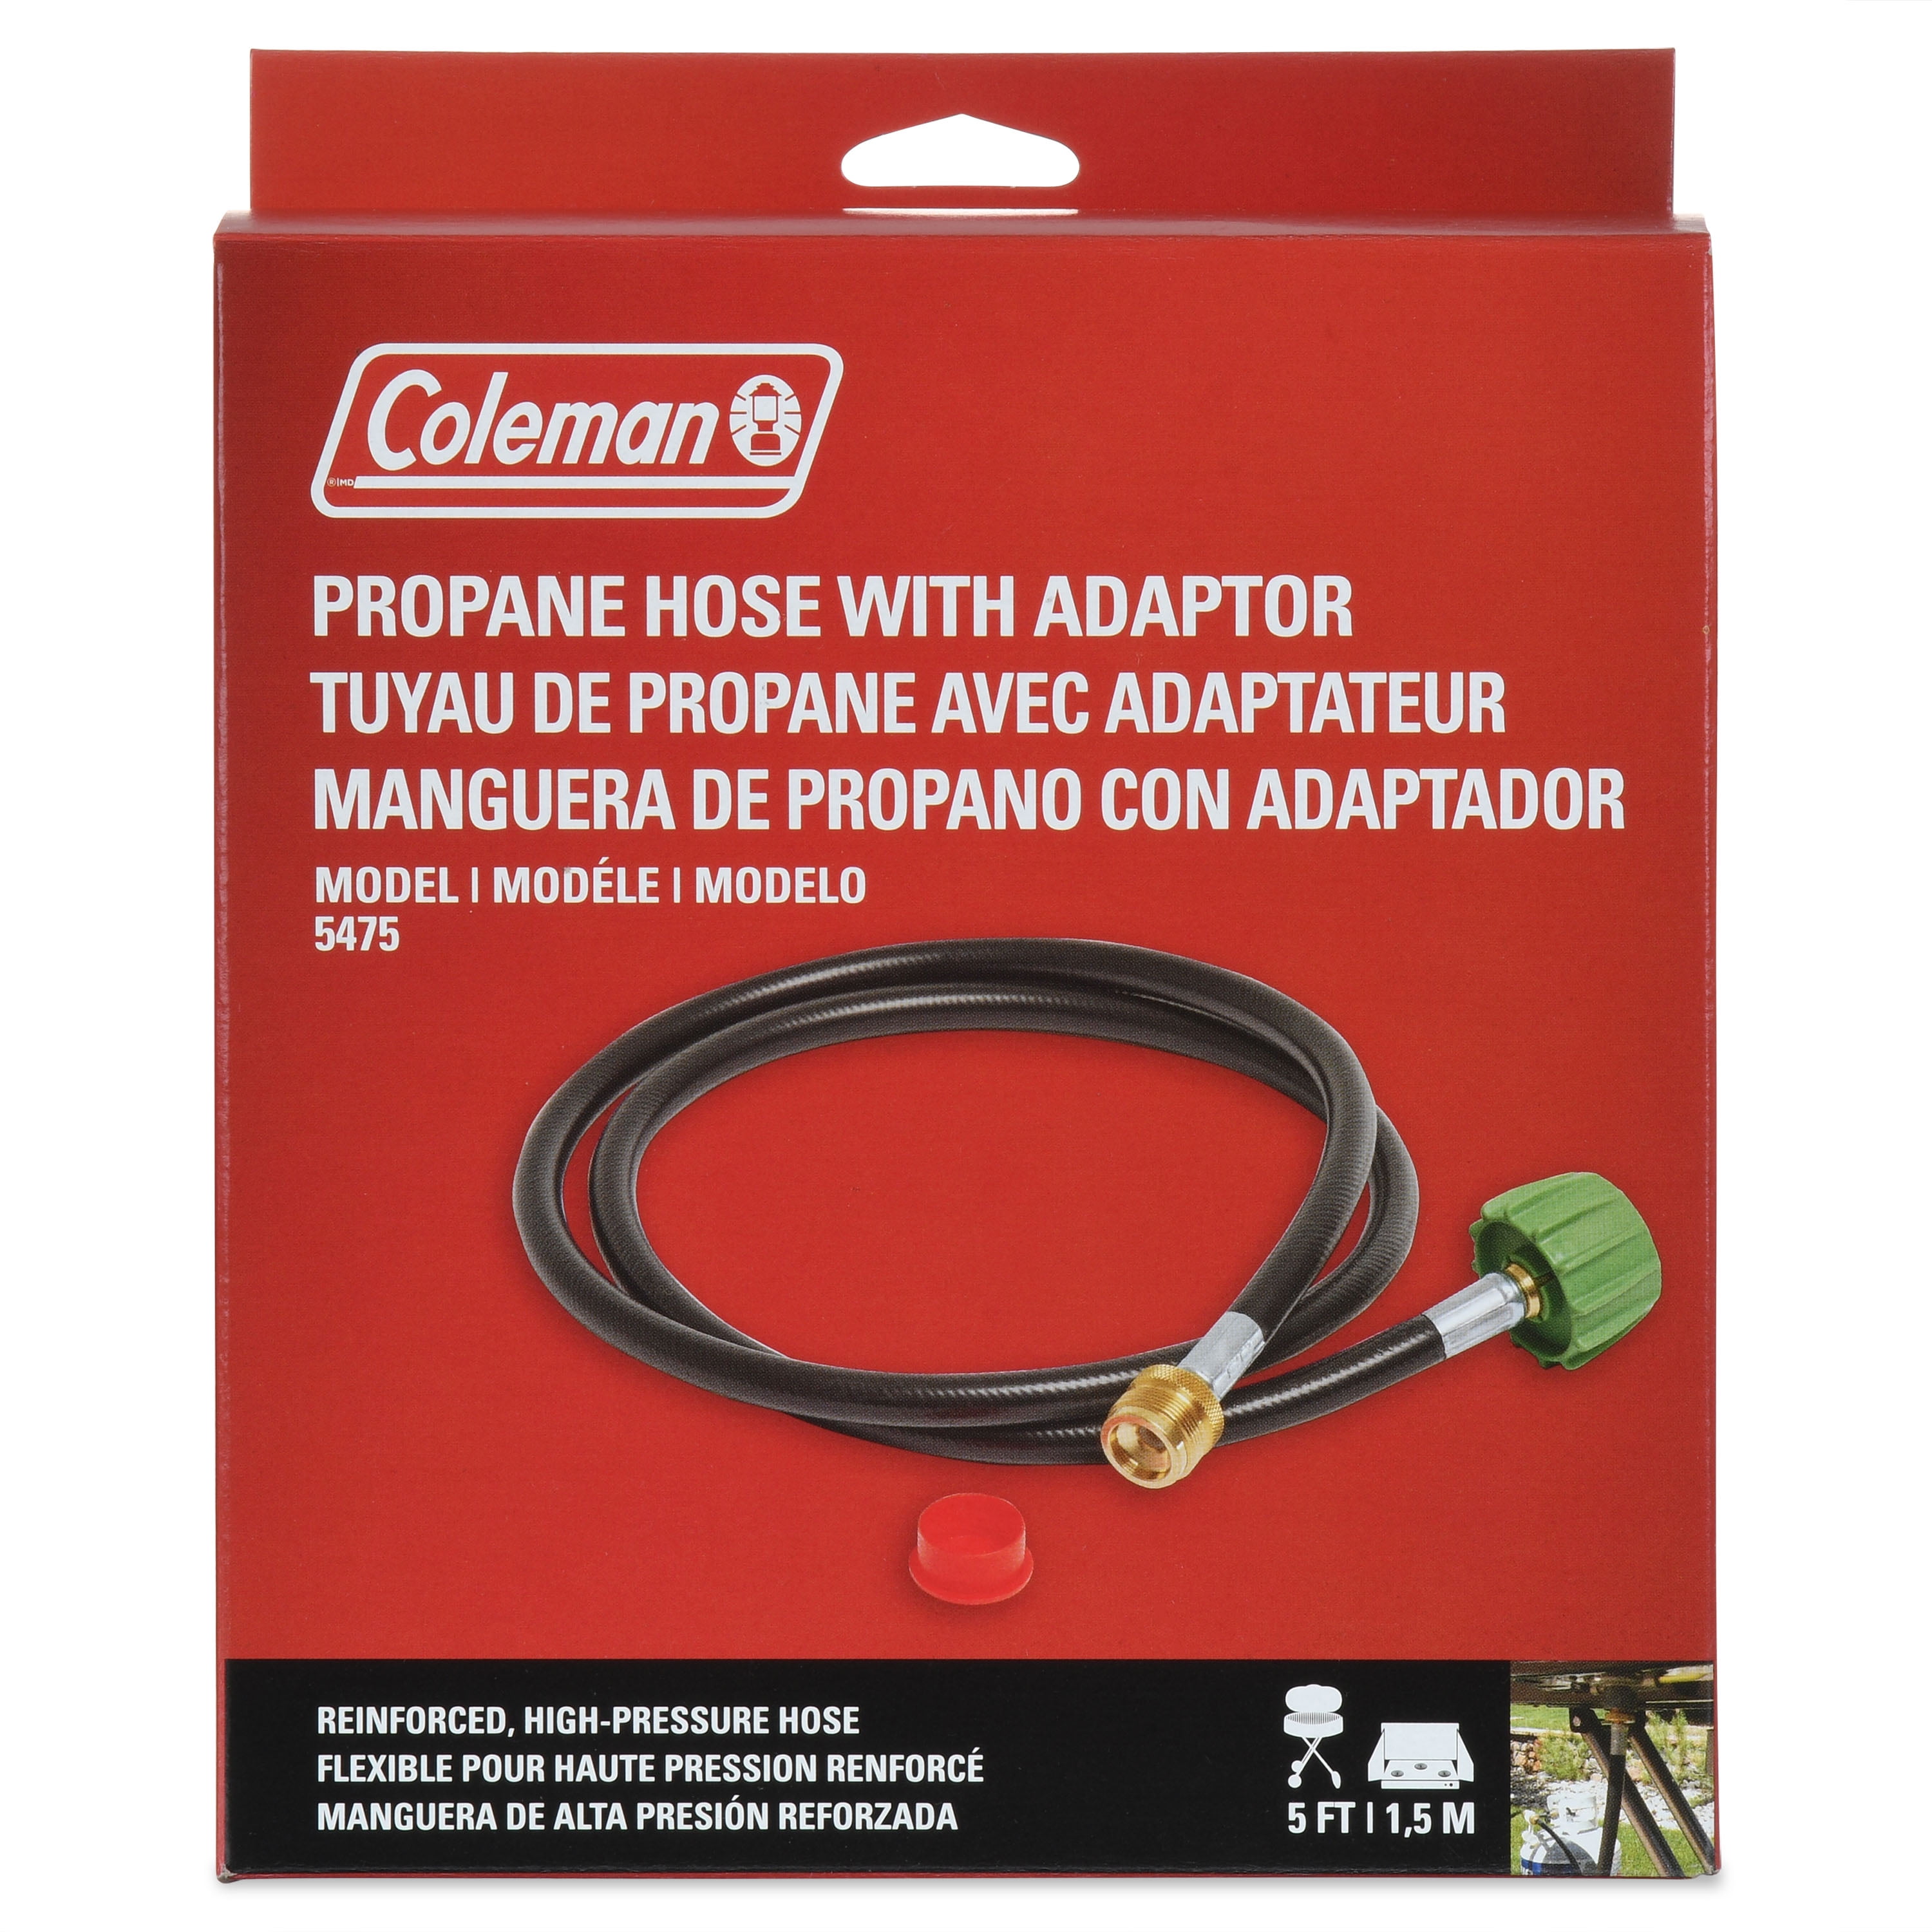 Coleman High-Pressure Propane Gas Hose and Adapter, 5 Foot, 1 Count